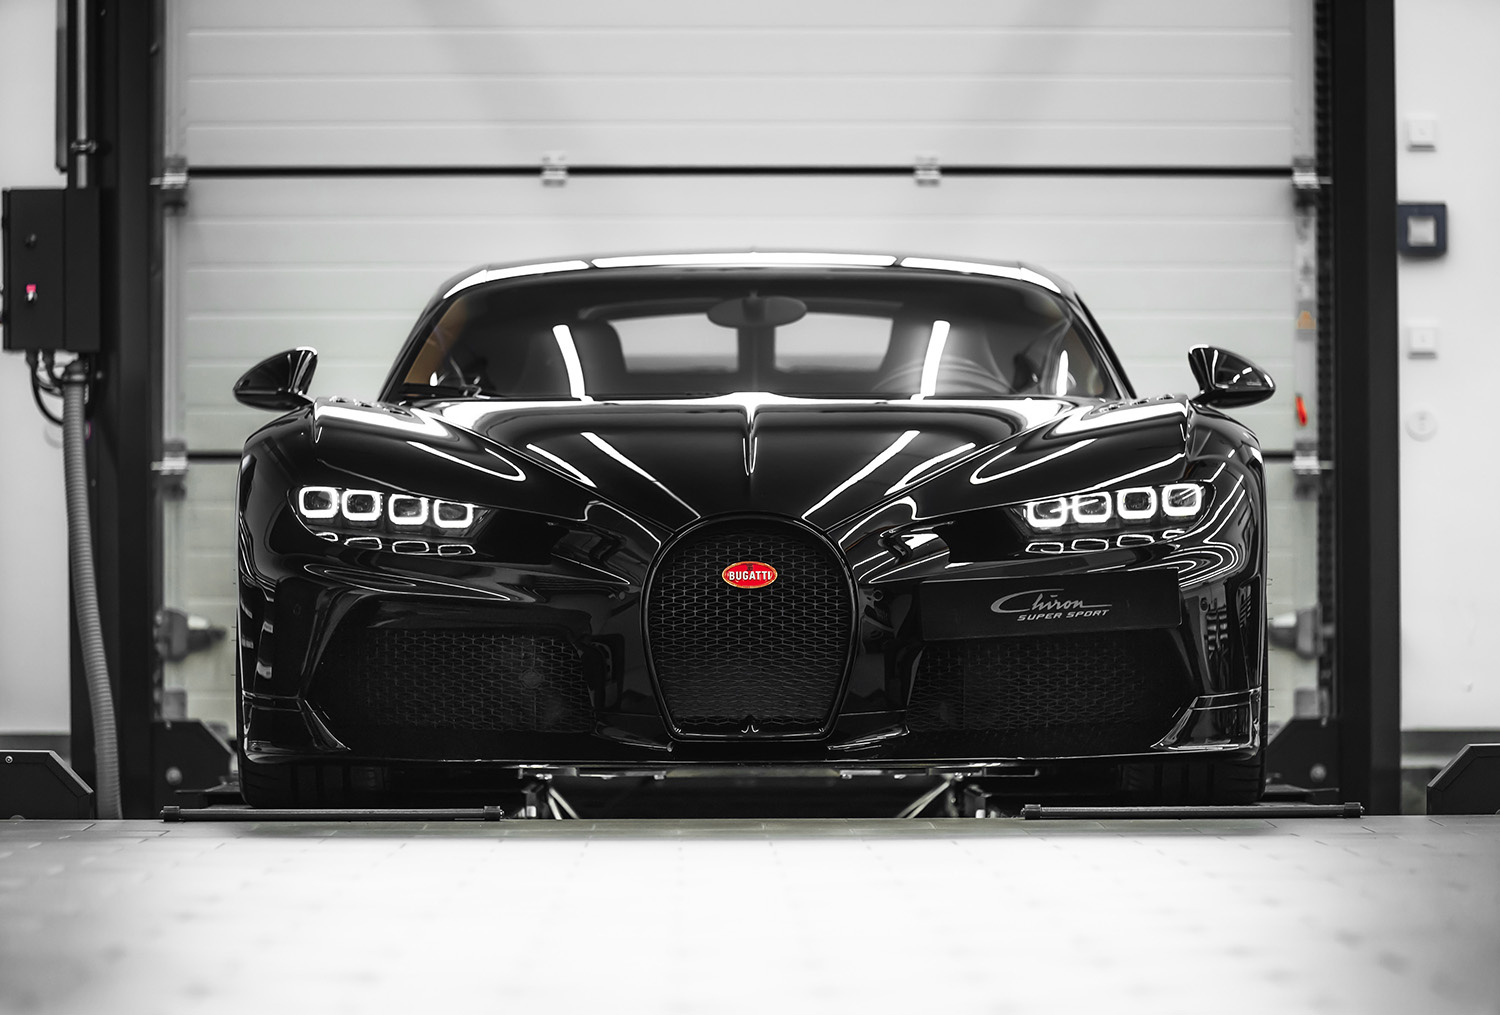 Bugatti Chiron Super Sport on Dyno, front end with daytime running lights on